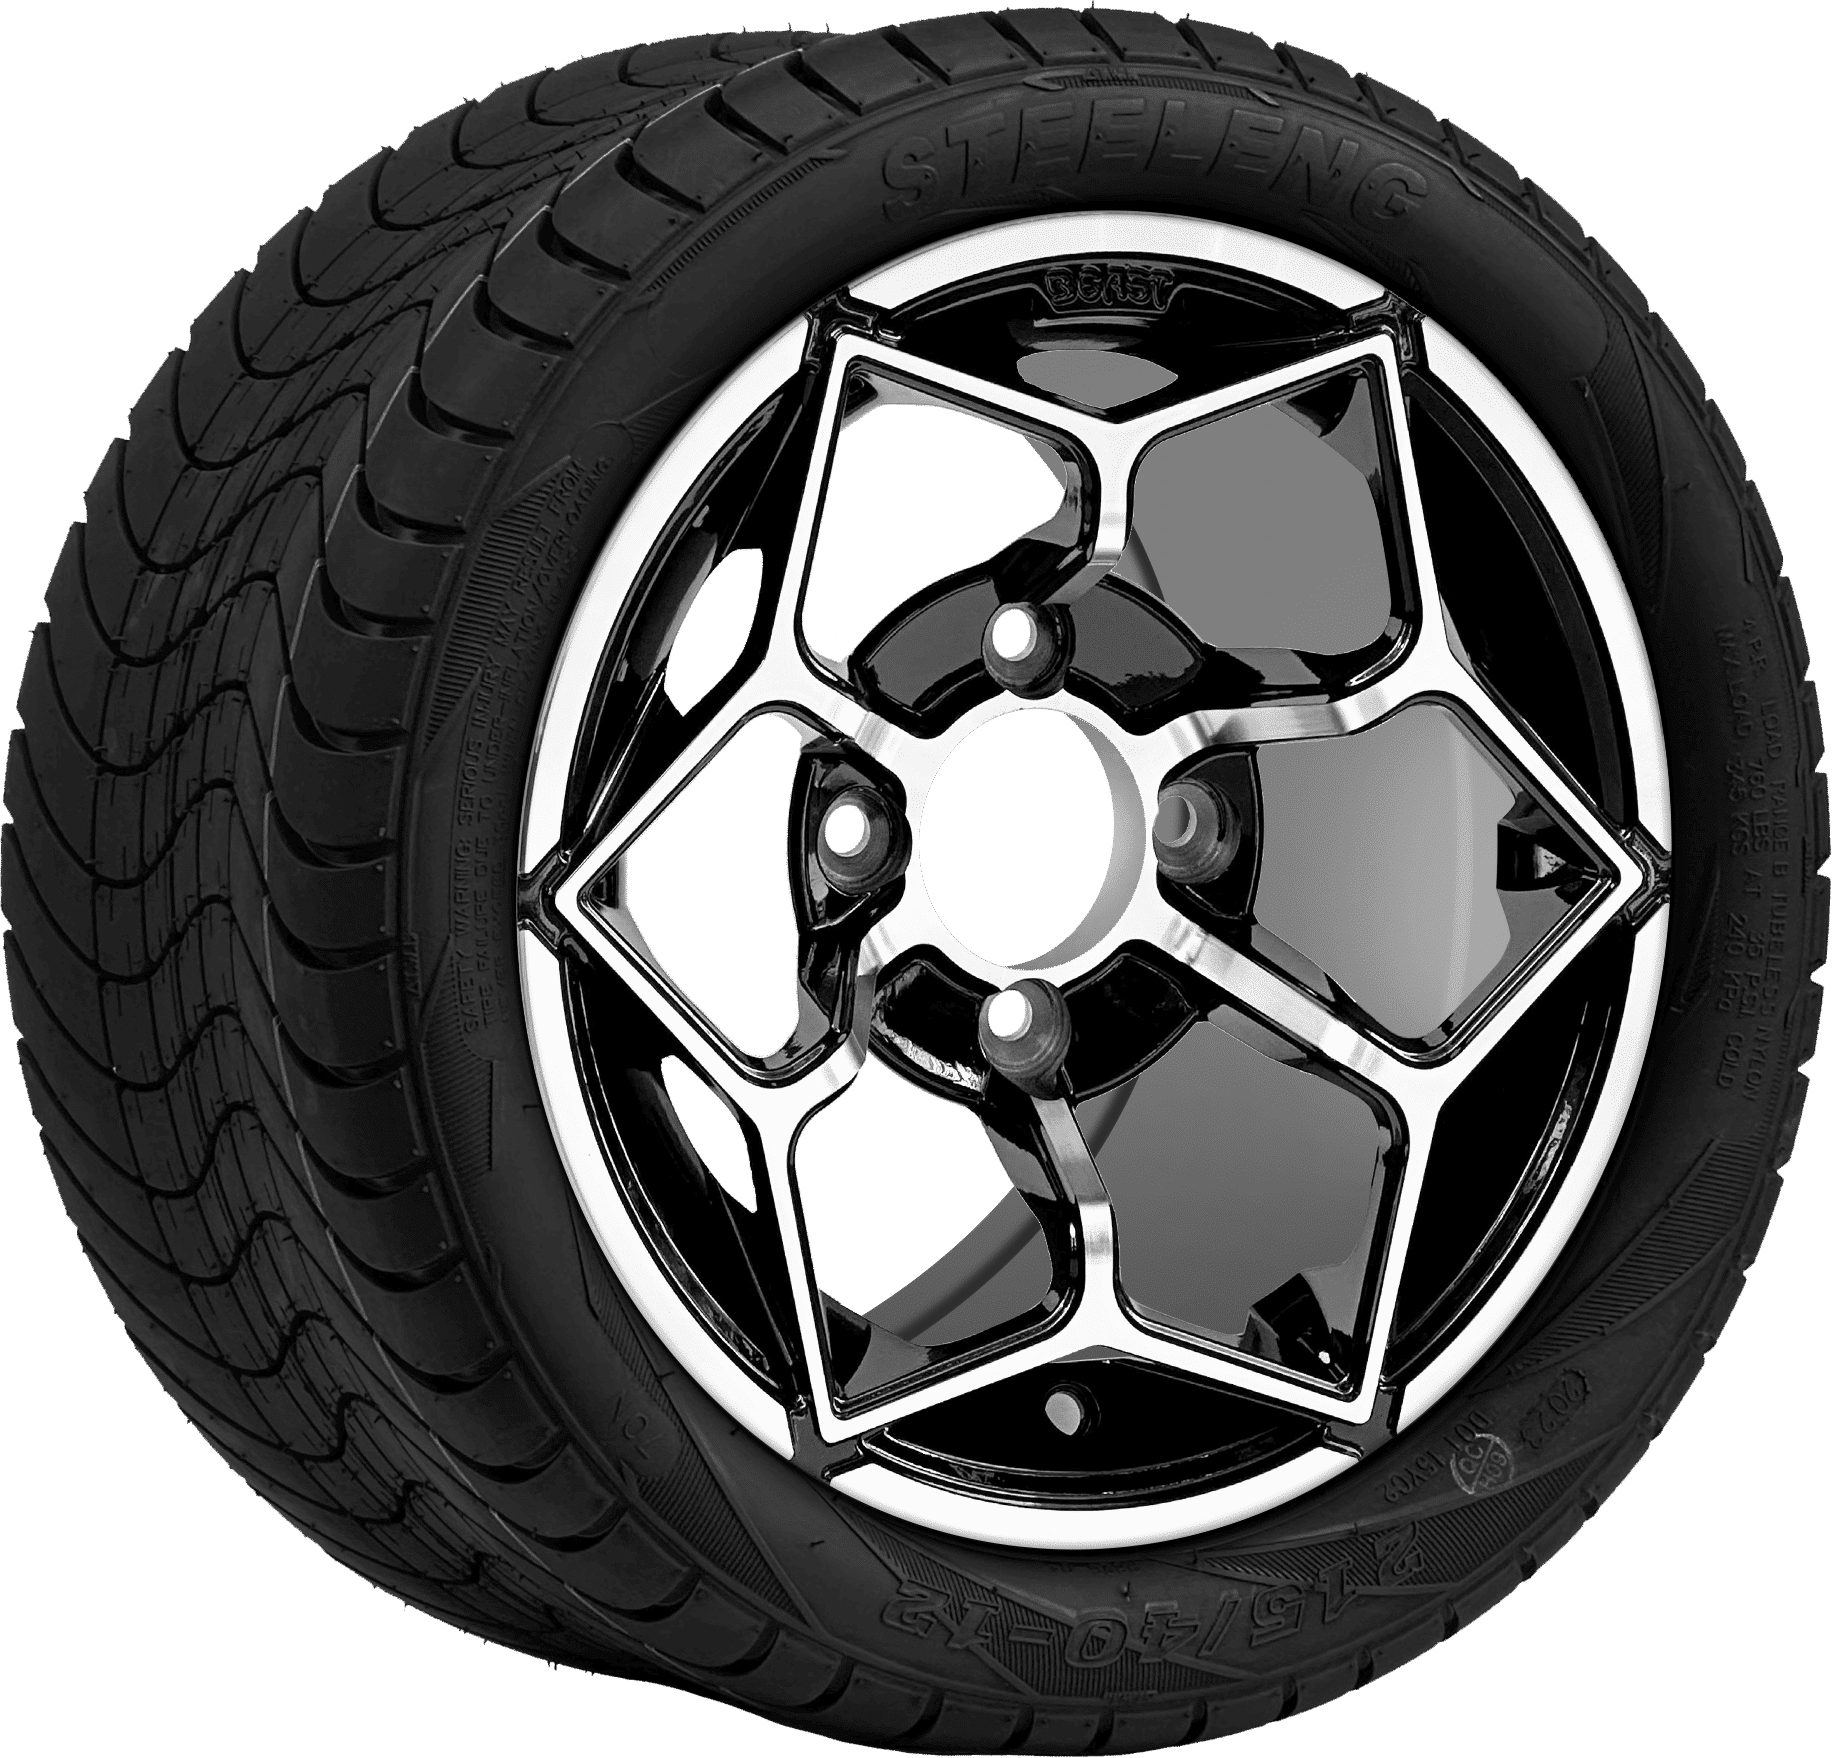 BNDL-TR1211-WH1266-CC0025-LN0004 12″ HAMMERHEAD MACHINED/BLACK WHEEL – ALUMINUM ALLOY / STEELENG 215/40-12 LOW PROFILE TIRE DOT APPROVED